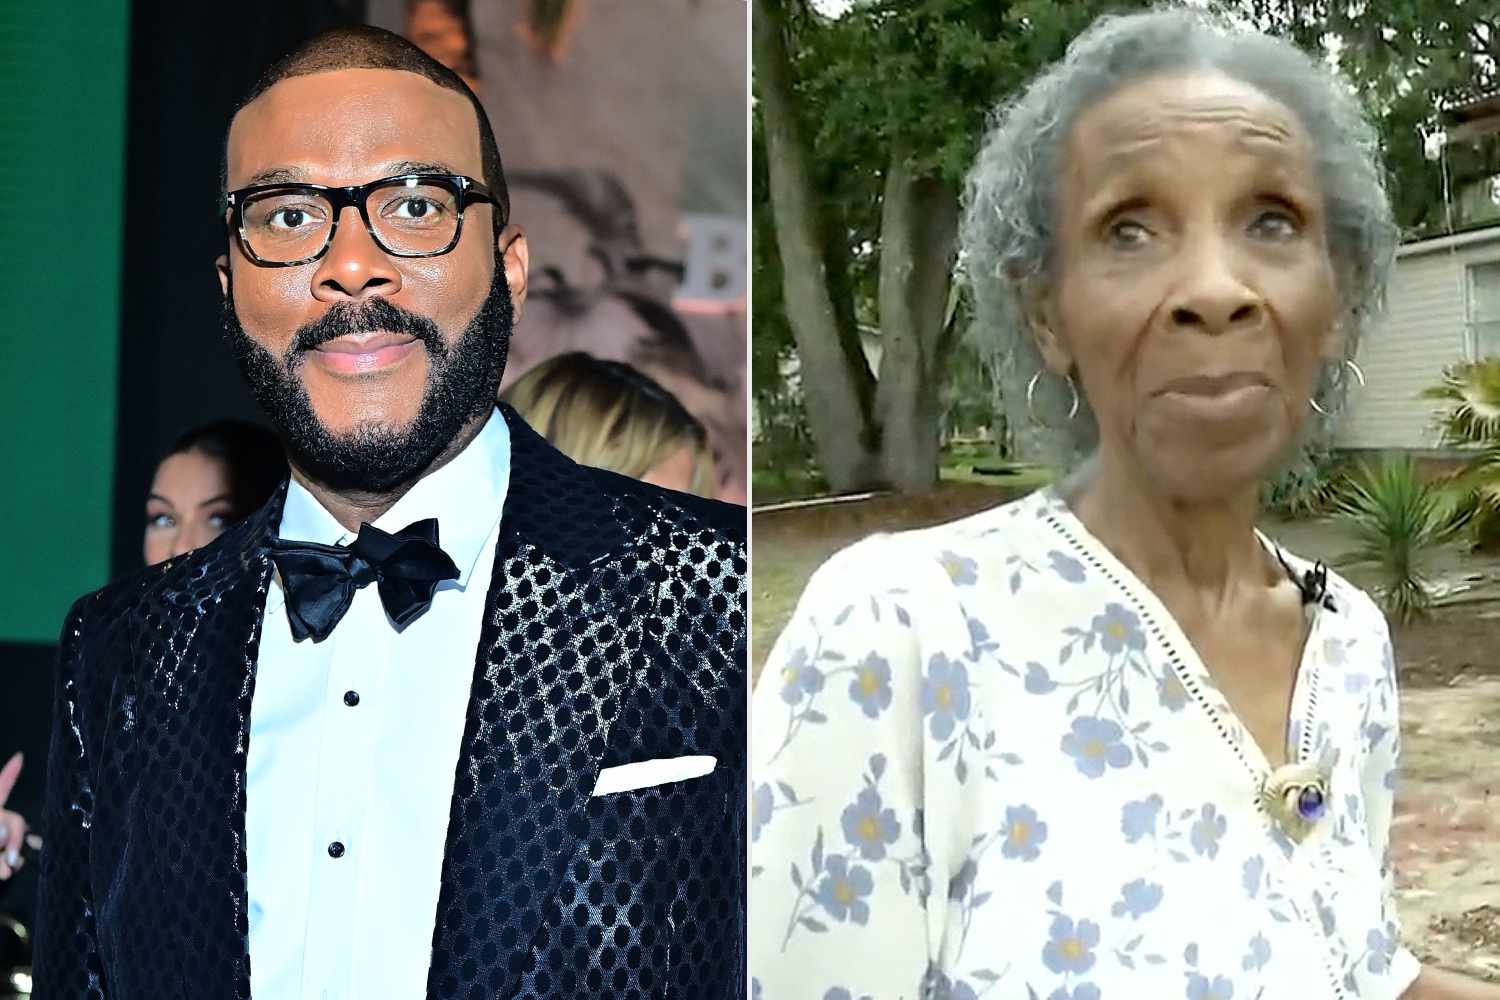 Tyler Perry Comes To The Rescue: Buys House For 93-Year-Old Woman Pushed Out By Developers